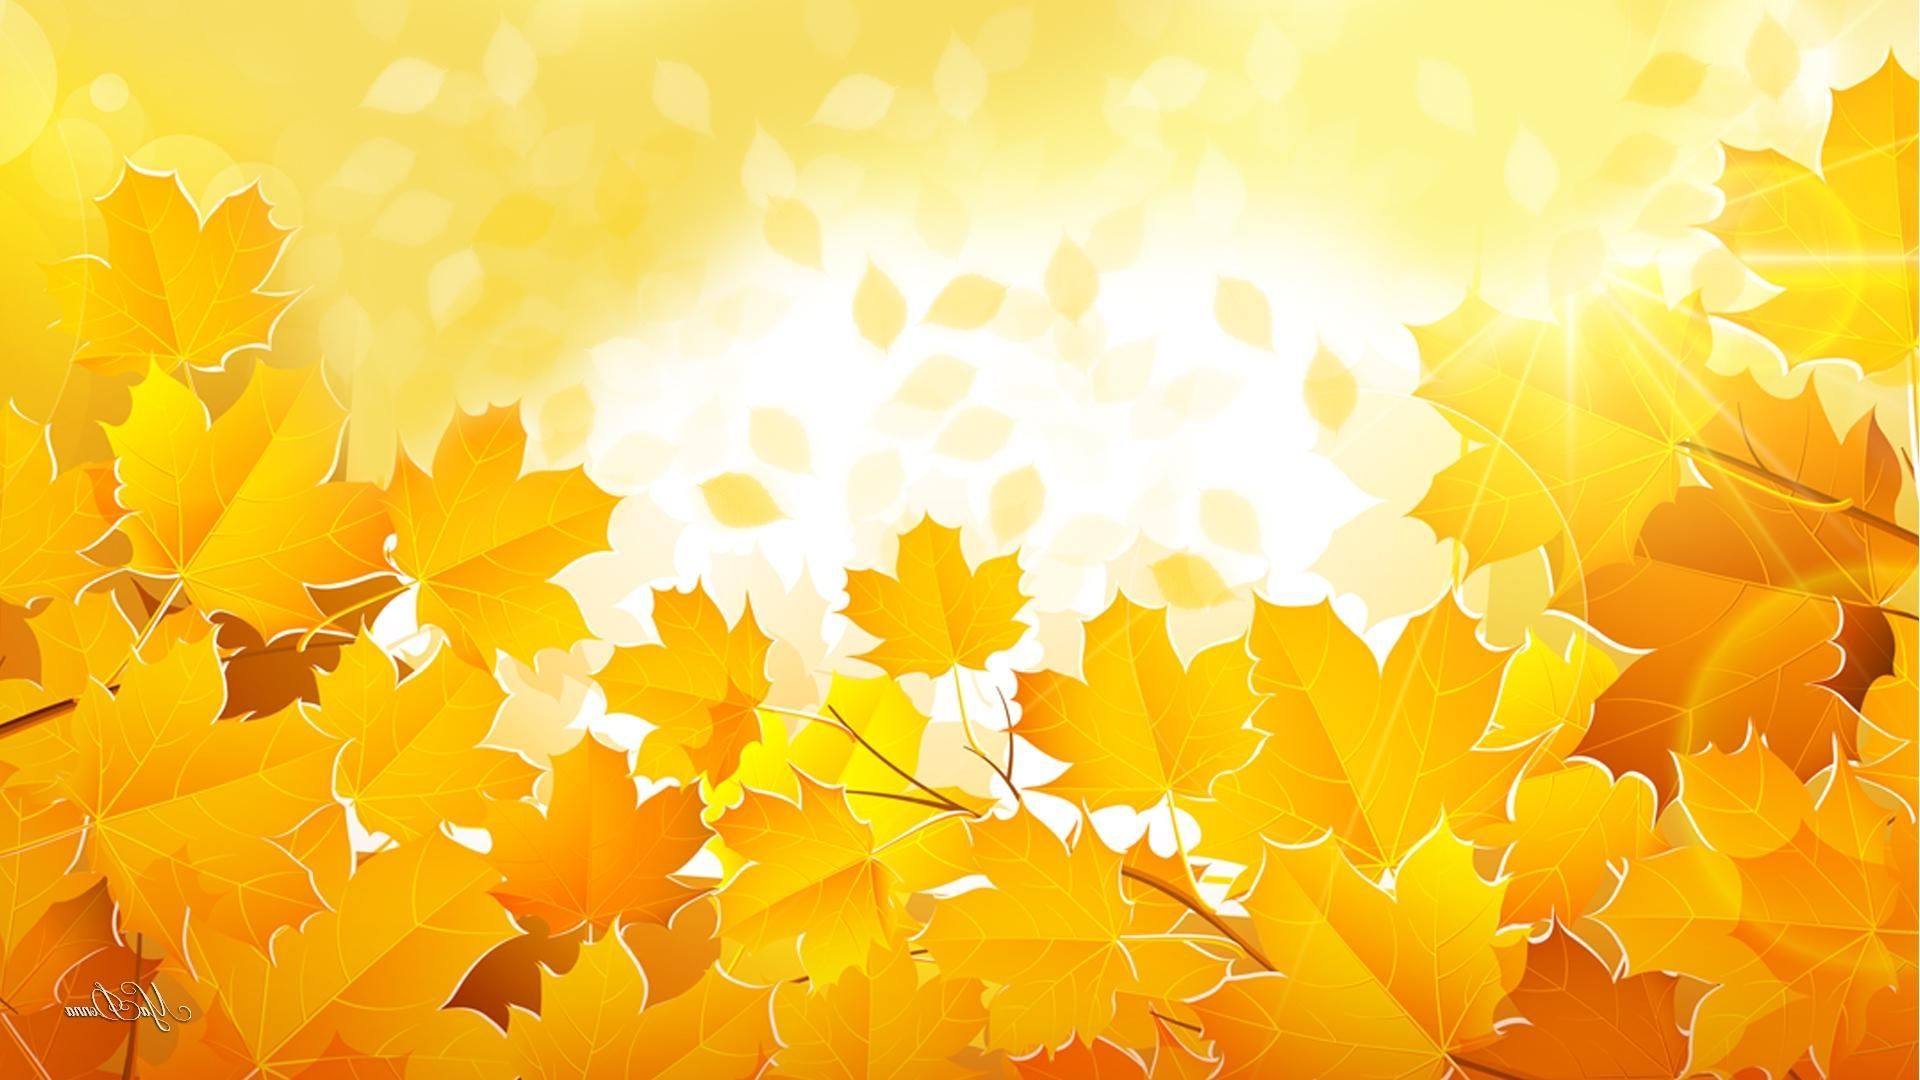 Cool Golden Autumn Leaves Abstract HD Wallpaper. Abstract, Abstract wallpaper, Autumn leaves